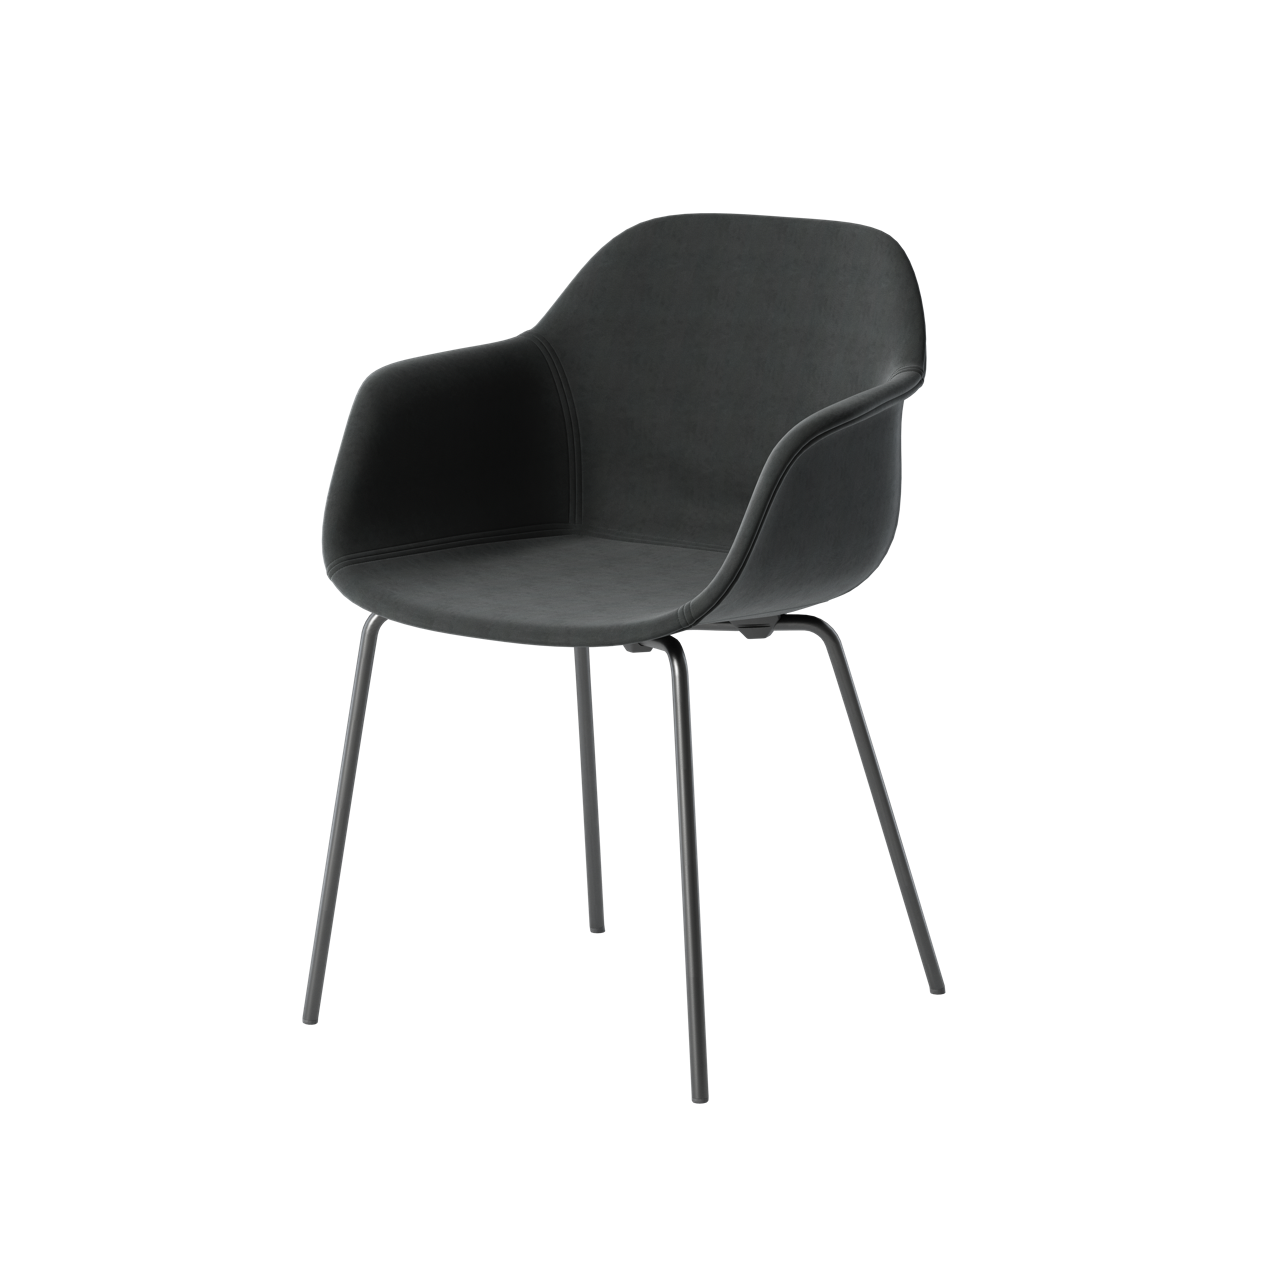 OCEE&FOUR – Chairs – FourMe 44 – Plastic Shell - Fully Upholstered - Packshot Image 1 Large